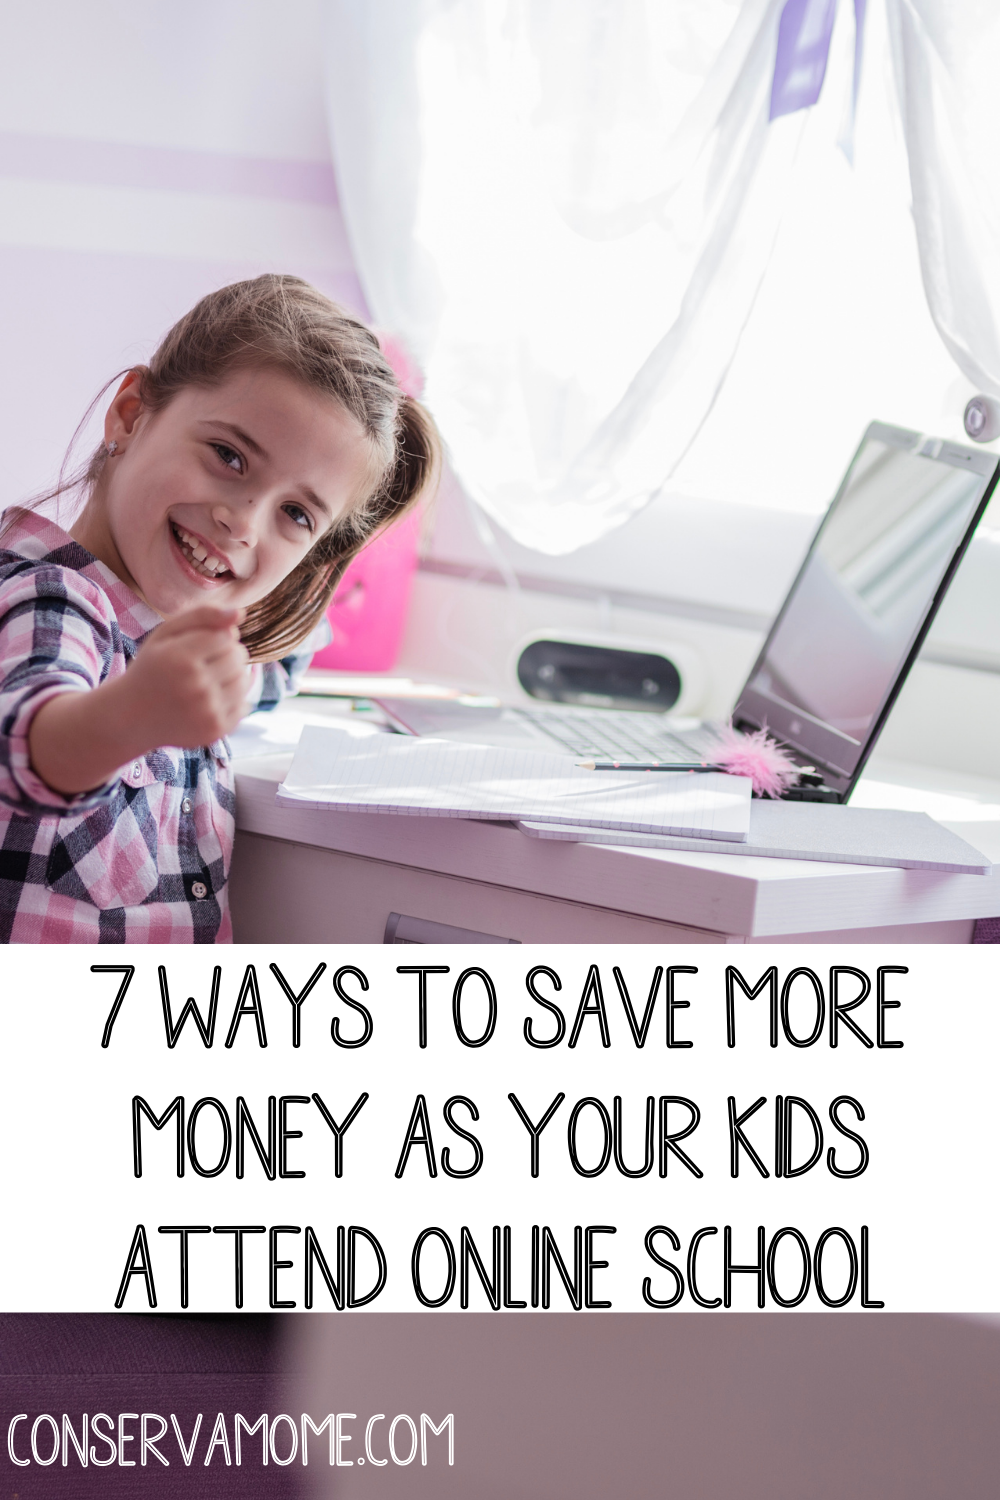 7 Ways to Save More Money as your kids attend online school